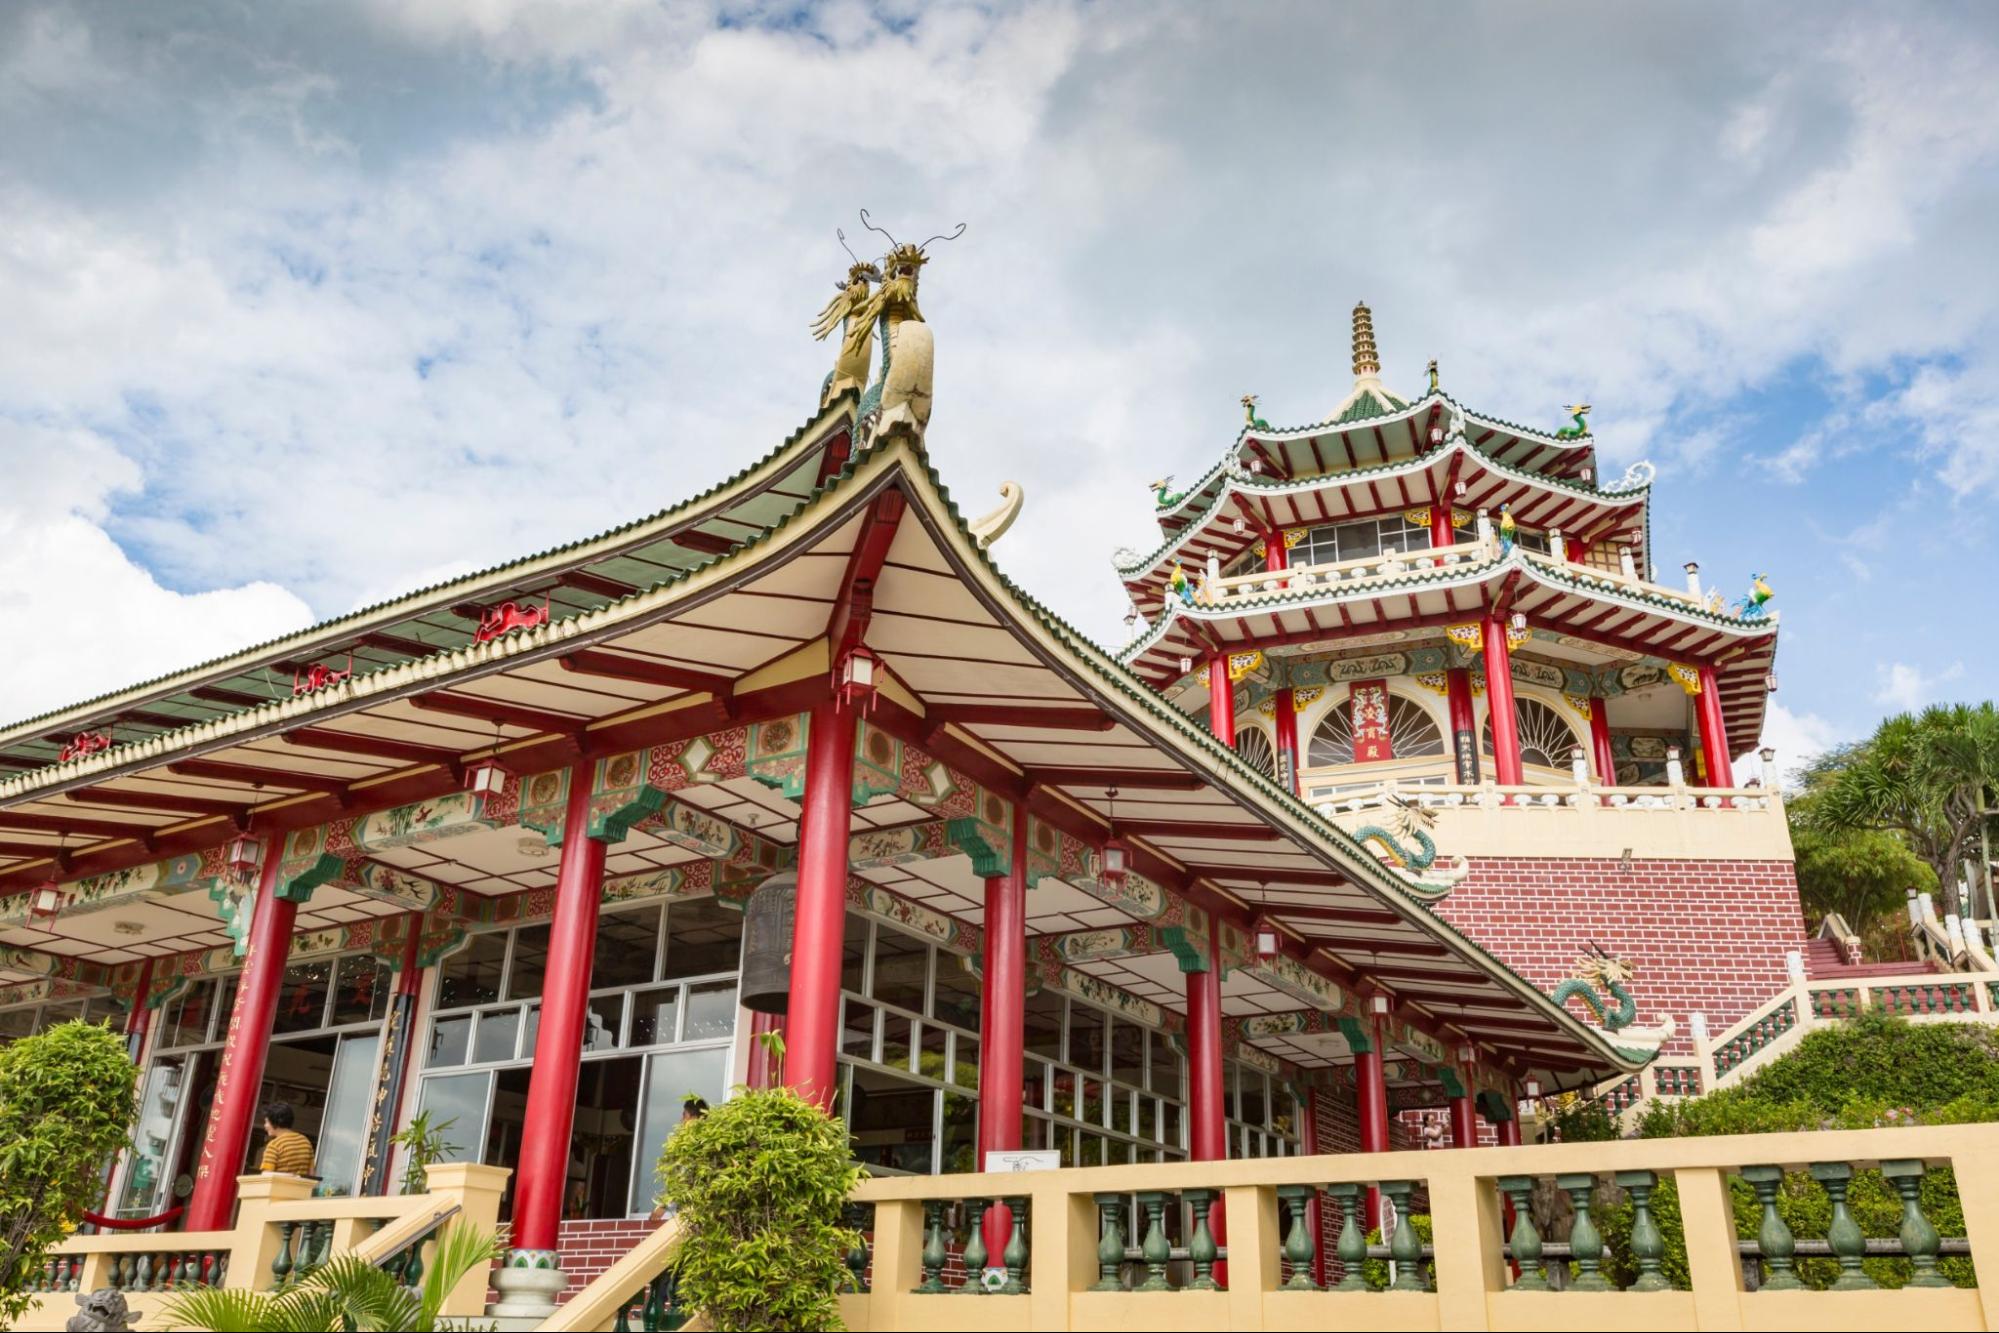 Pagoda and dragon sculpture of the Taoist Temple in Cebu, Philippines